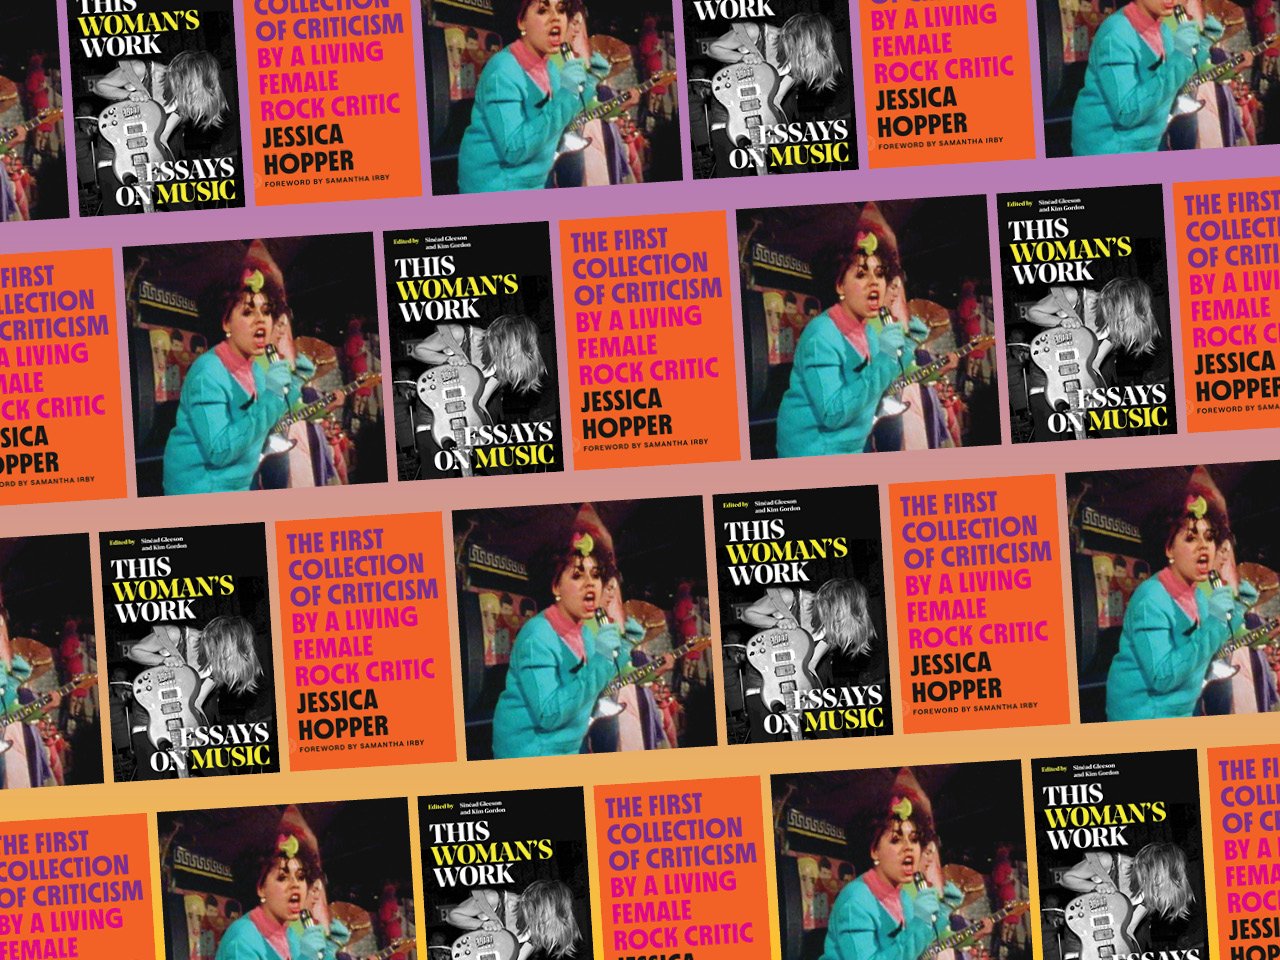 a tiled image of the cover of the book This Woman’s Work: Essays on Music, the documentary Poly Styrene: I Am a Cliché, and the book The First Collection of Criticism by a Living Female Rock Critic